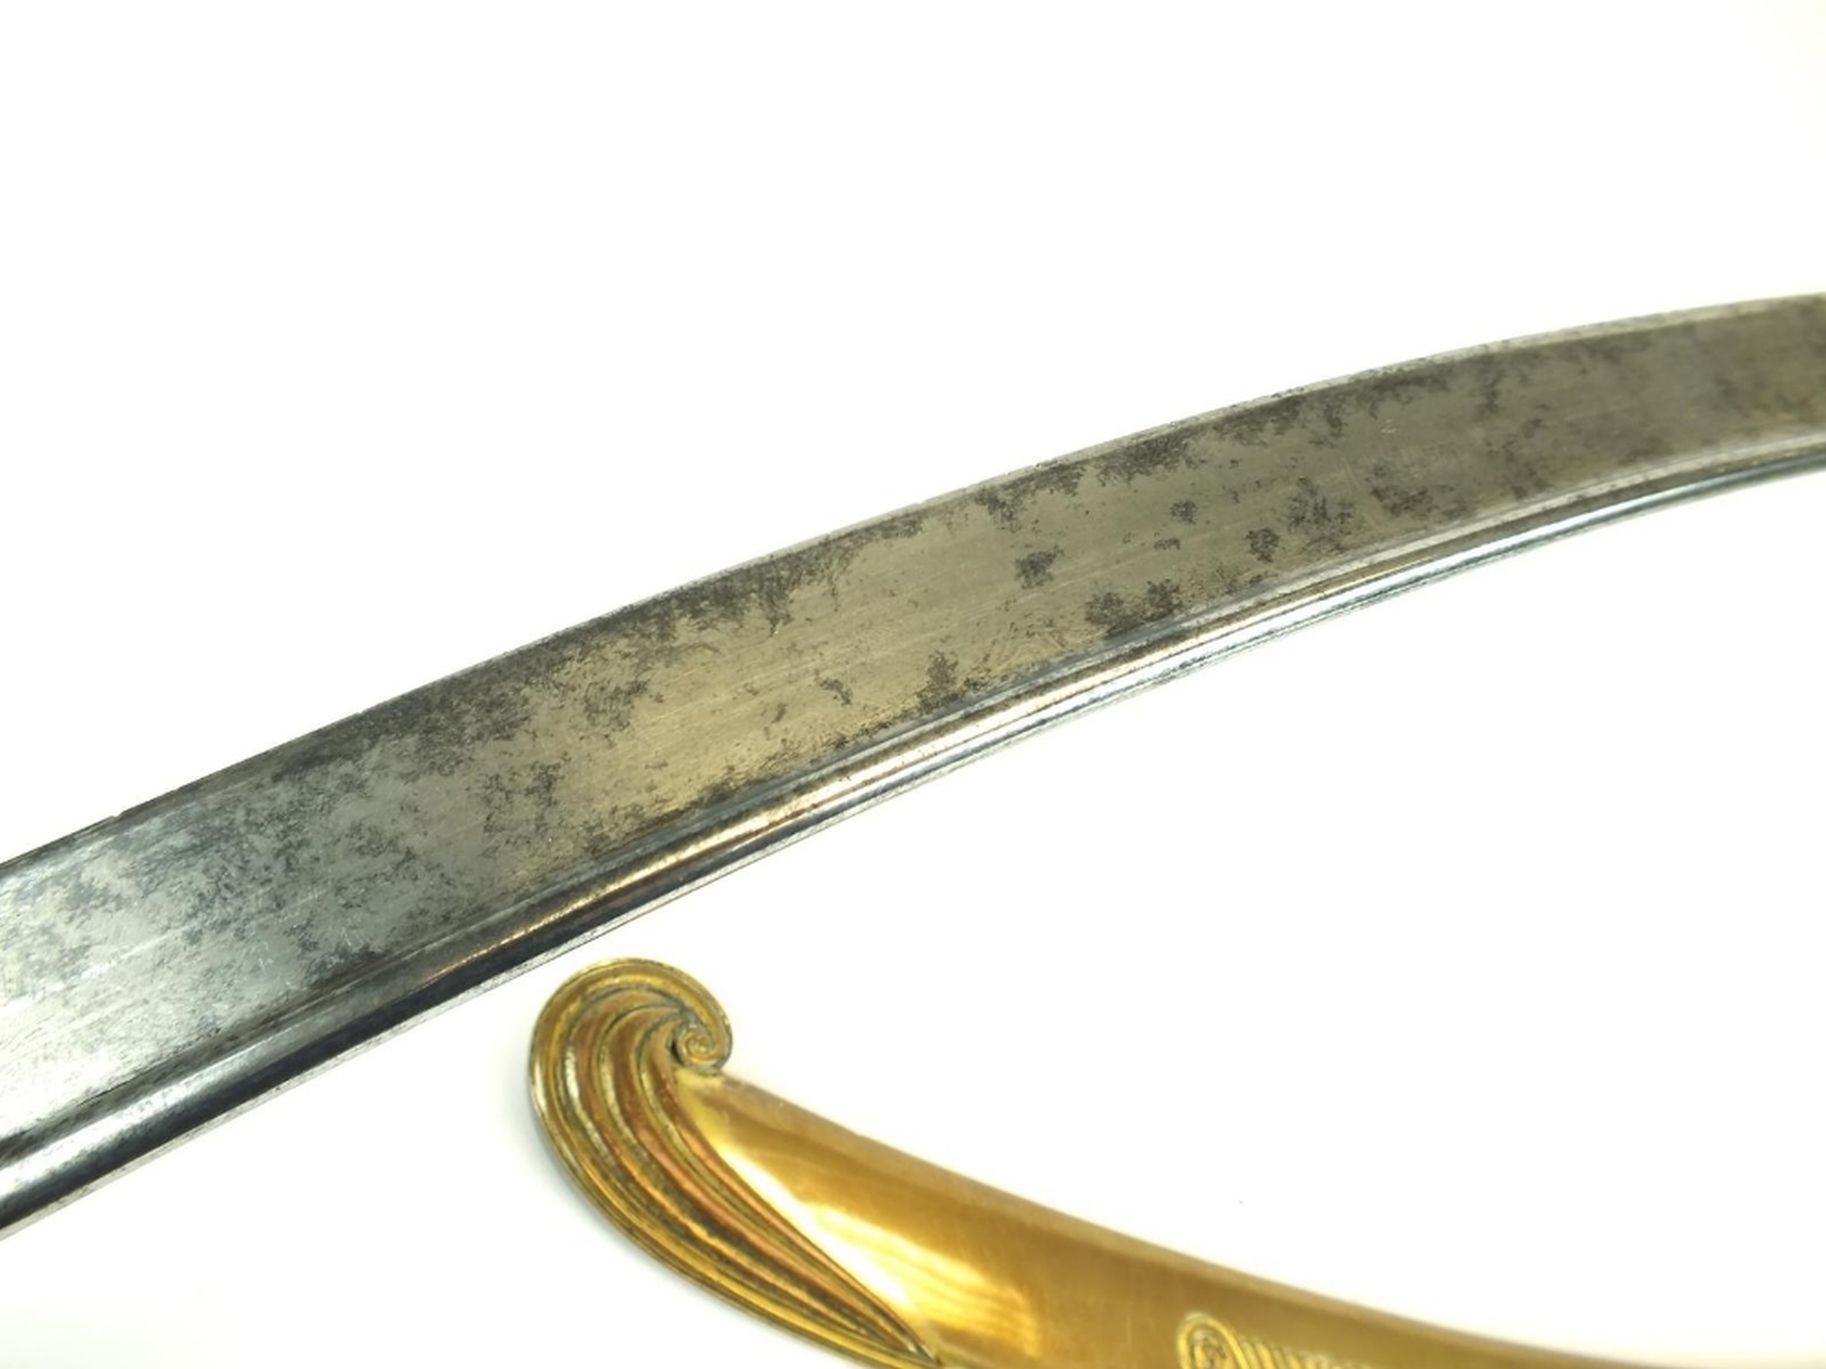 A LATE 18TH OR EARLY 19TH CENTURY PRESENTATION QUALITY SABRE BY PROSSER, 83cm sharply curved pipe- - Image 17 of 18